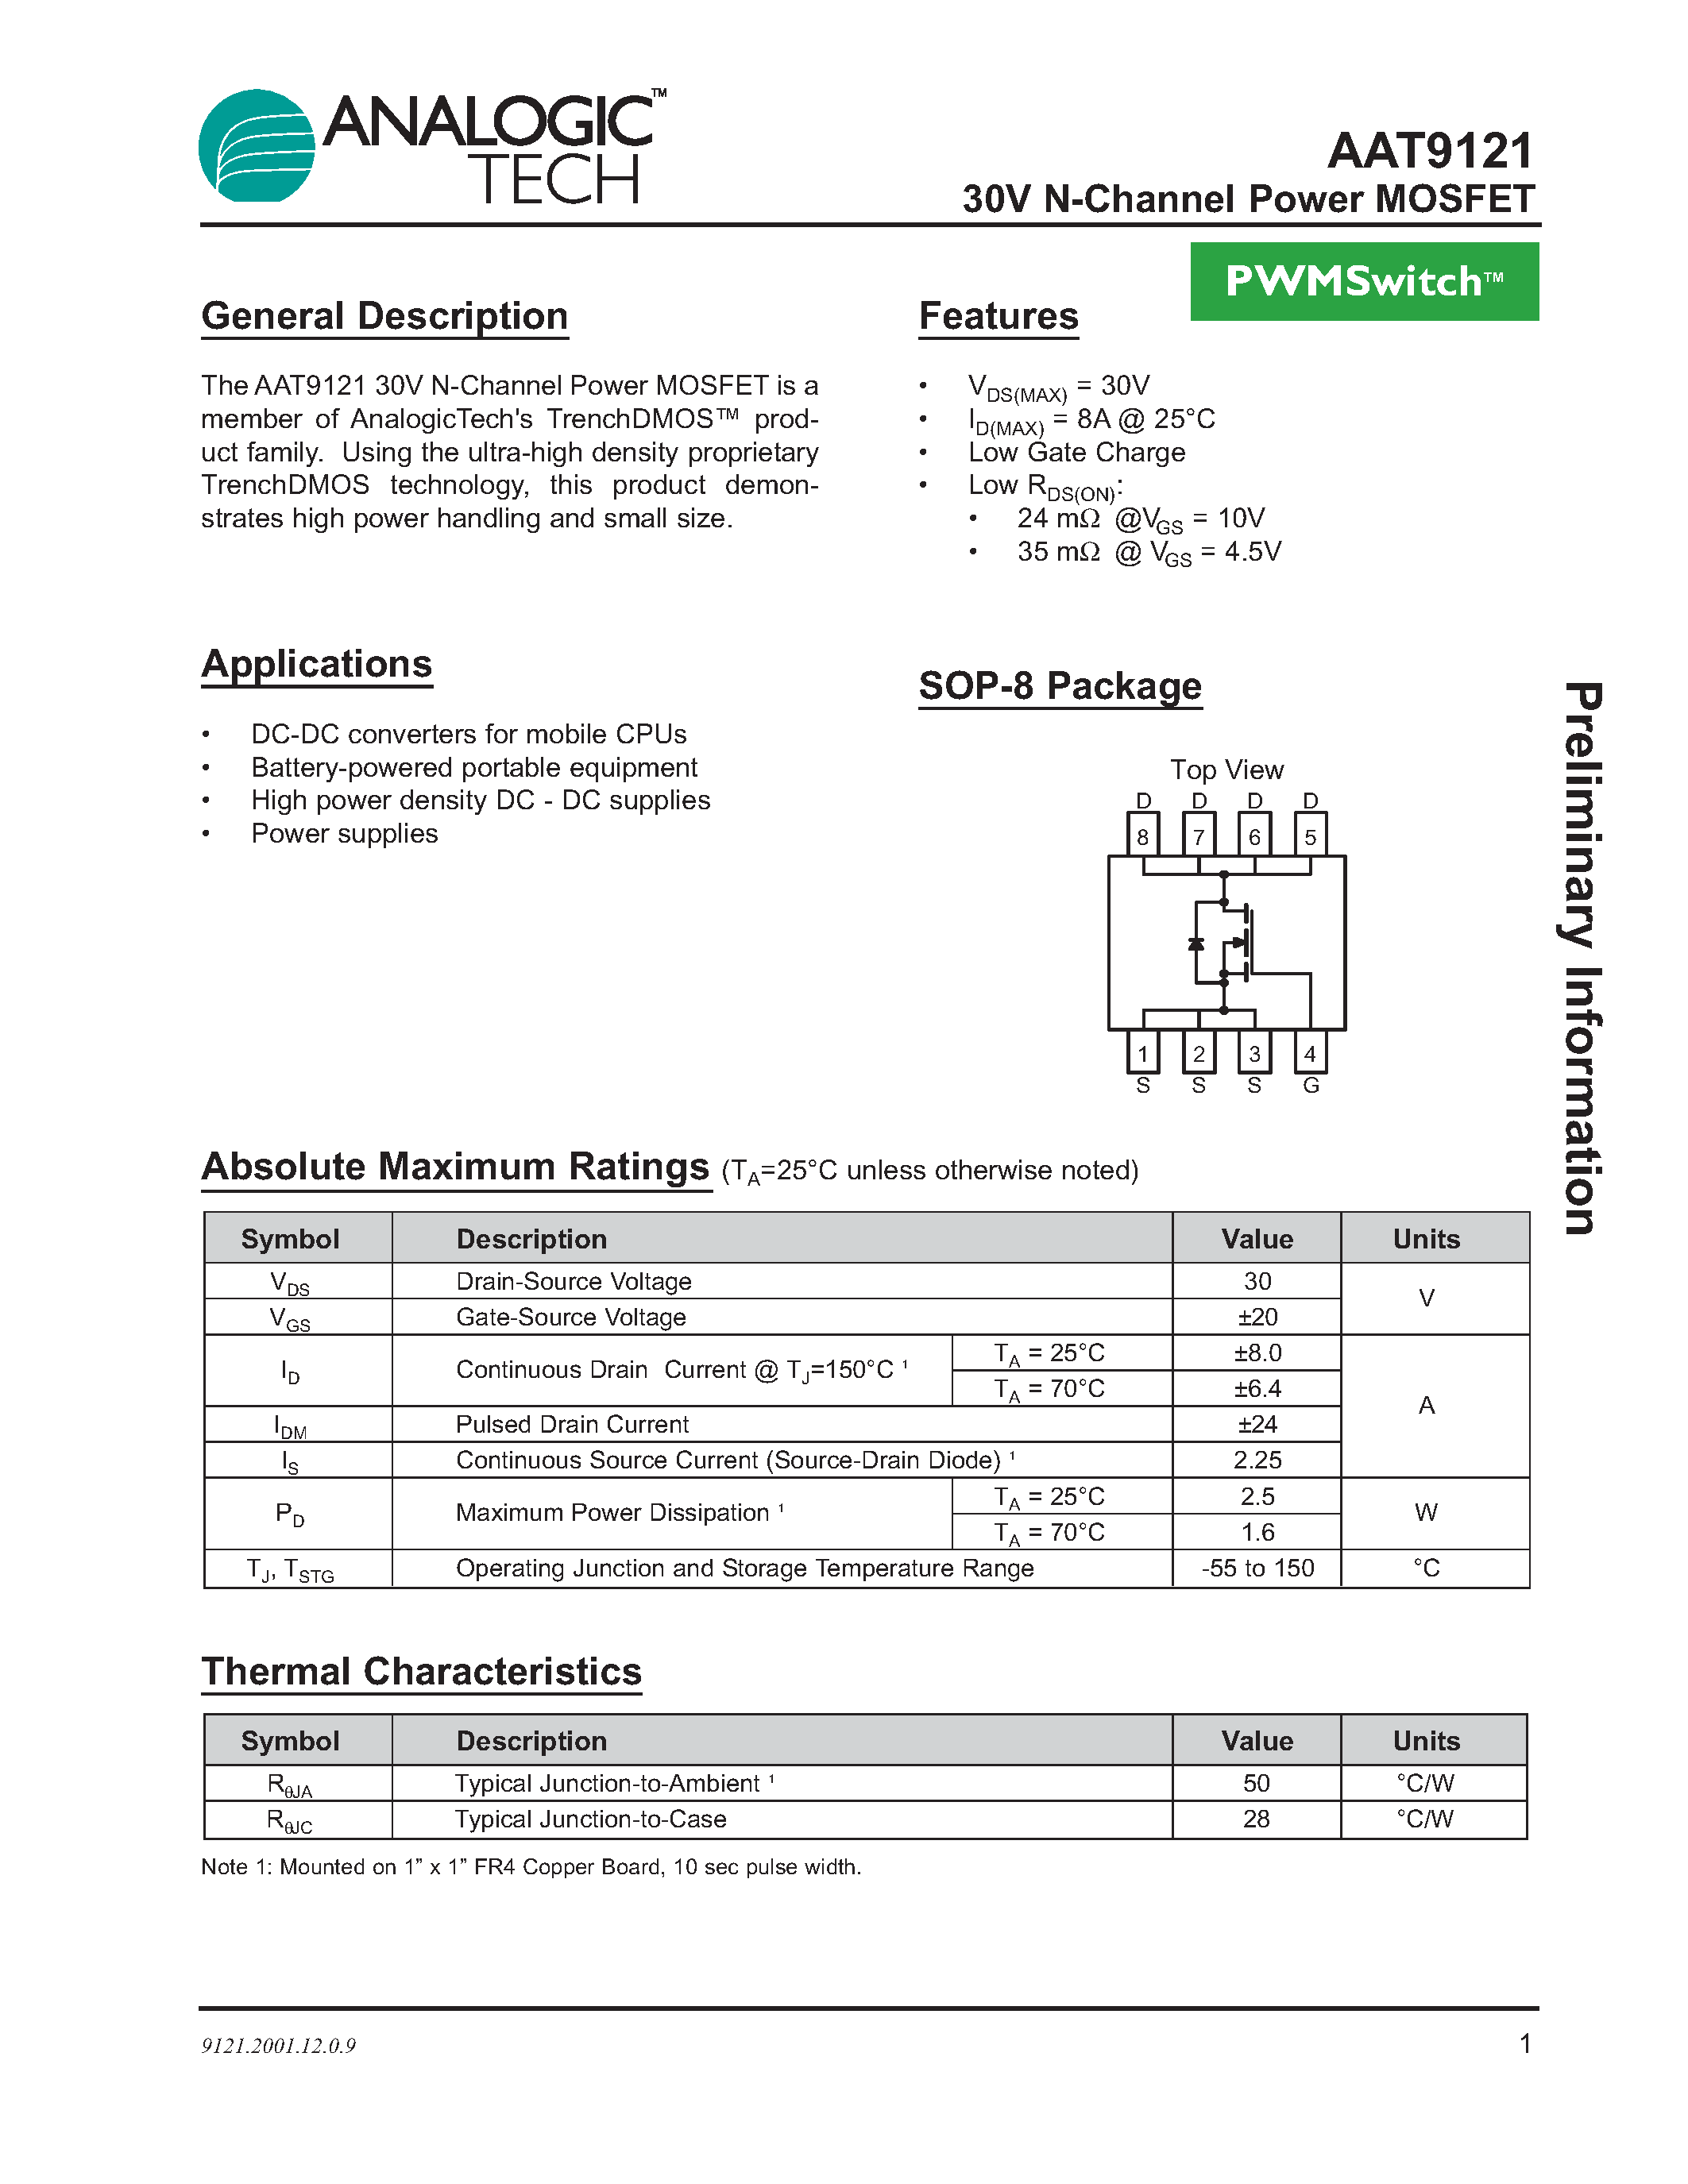 Datasheet AAT9121IAS-B1 - 30V N-Channel Power MOSFET page 1